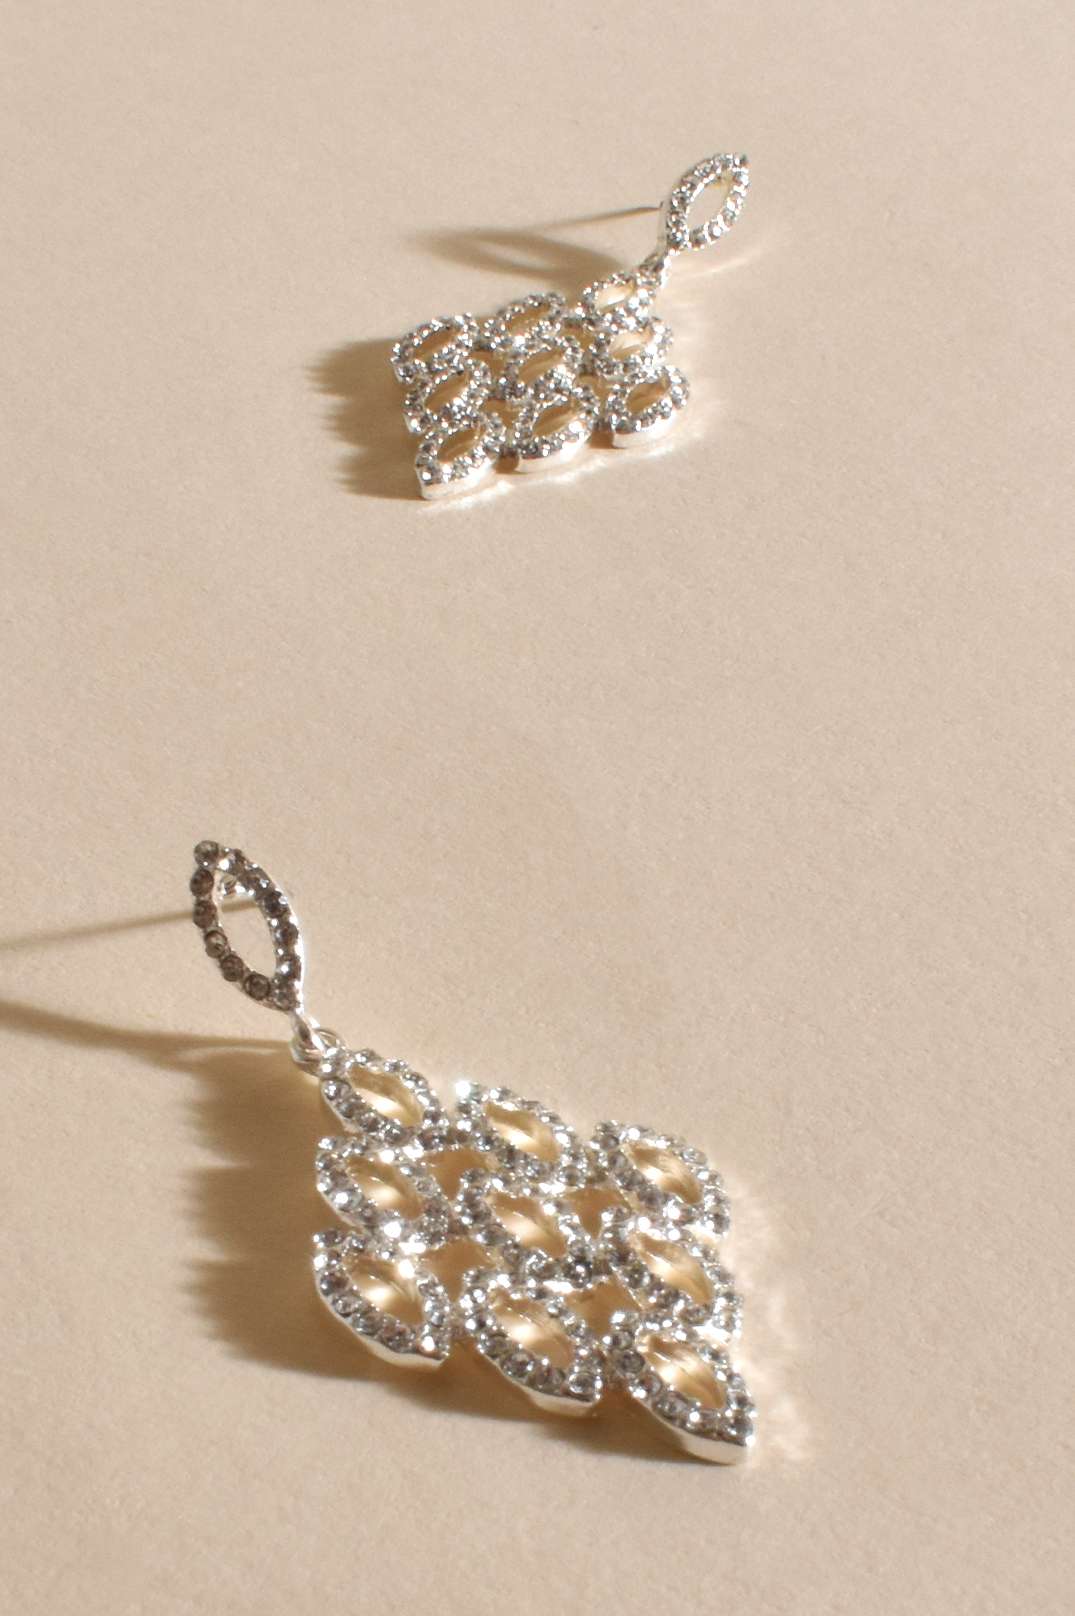 Adorne Diamante Chandelier Earrings - Glamour and Sparkle